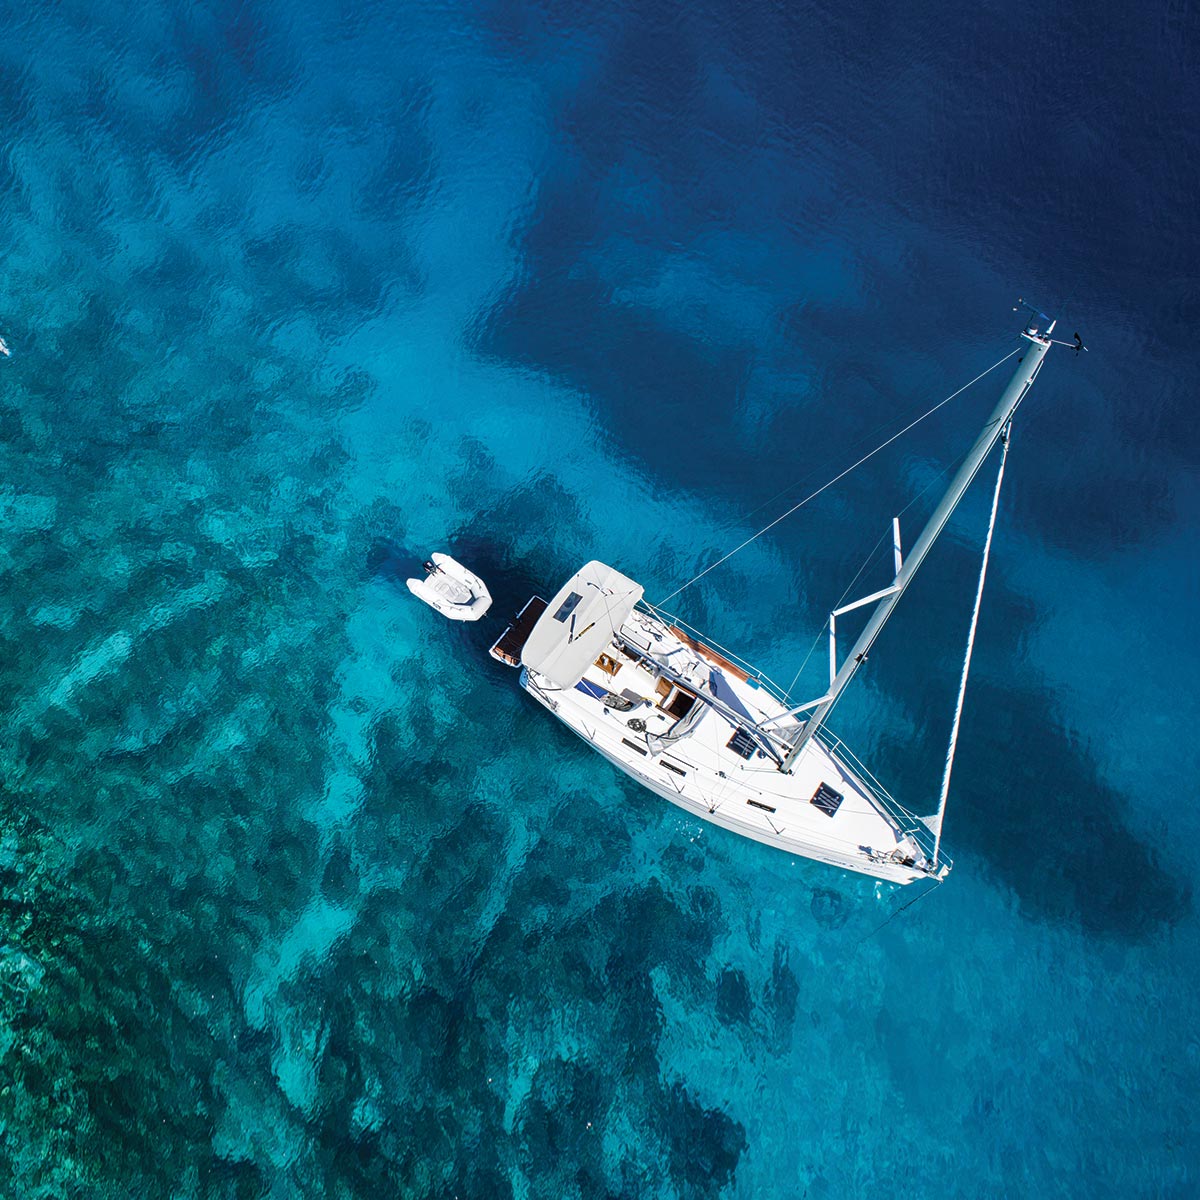 Sailboat in Australia. Find more than 15,000 boat sales in Australia and NZ, including power boats, sailboats, jet ski, dinghy, boat trailers, boat engines, & outboards for sale here.